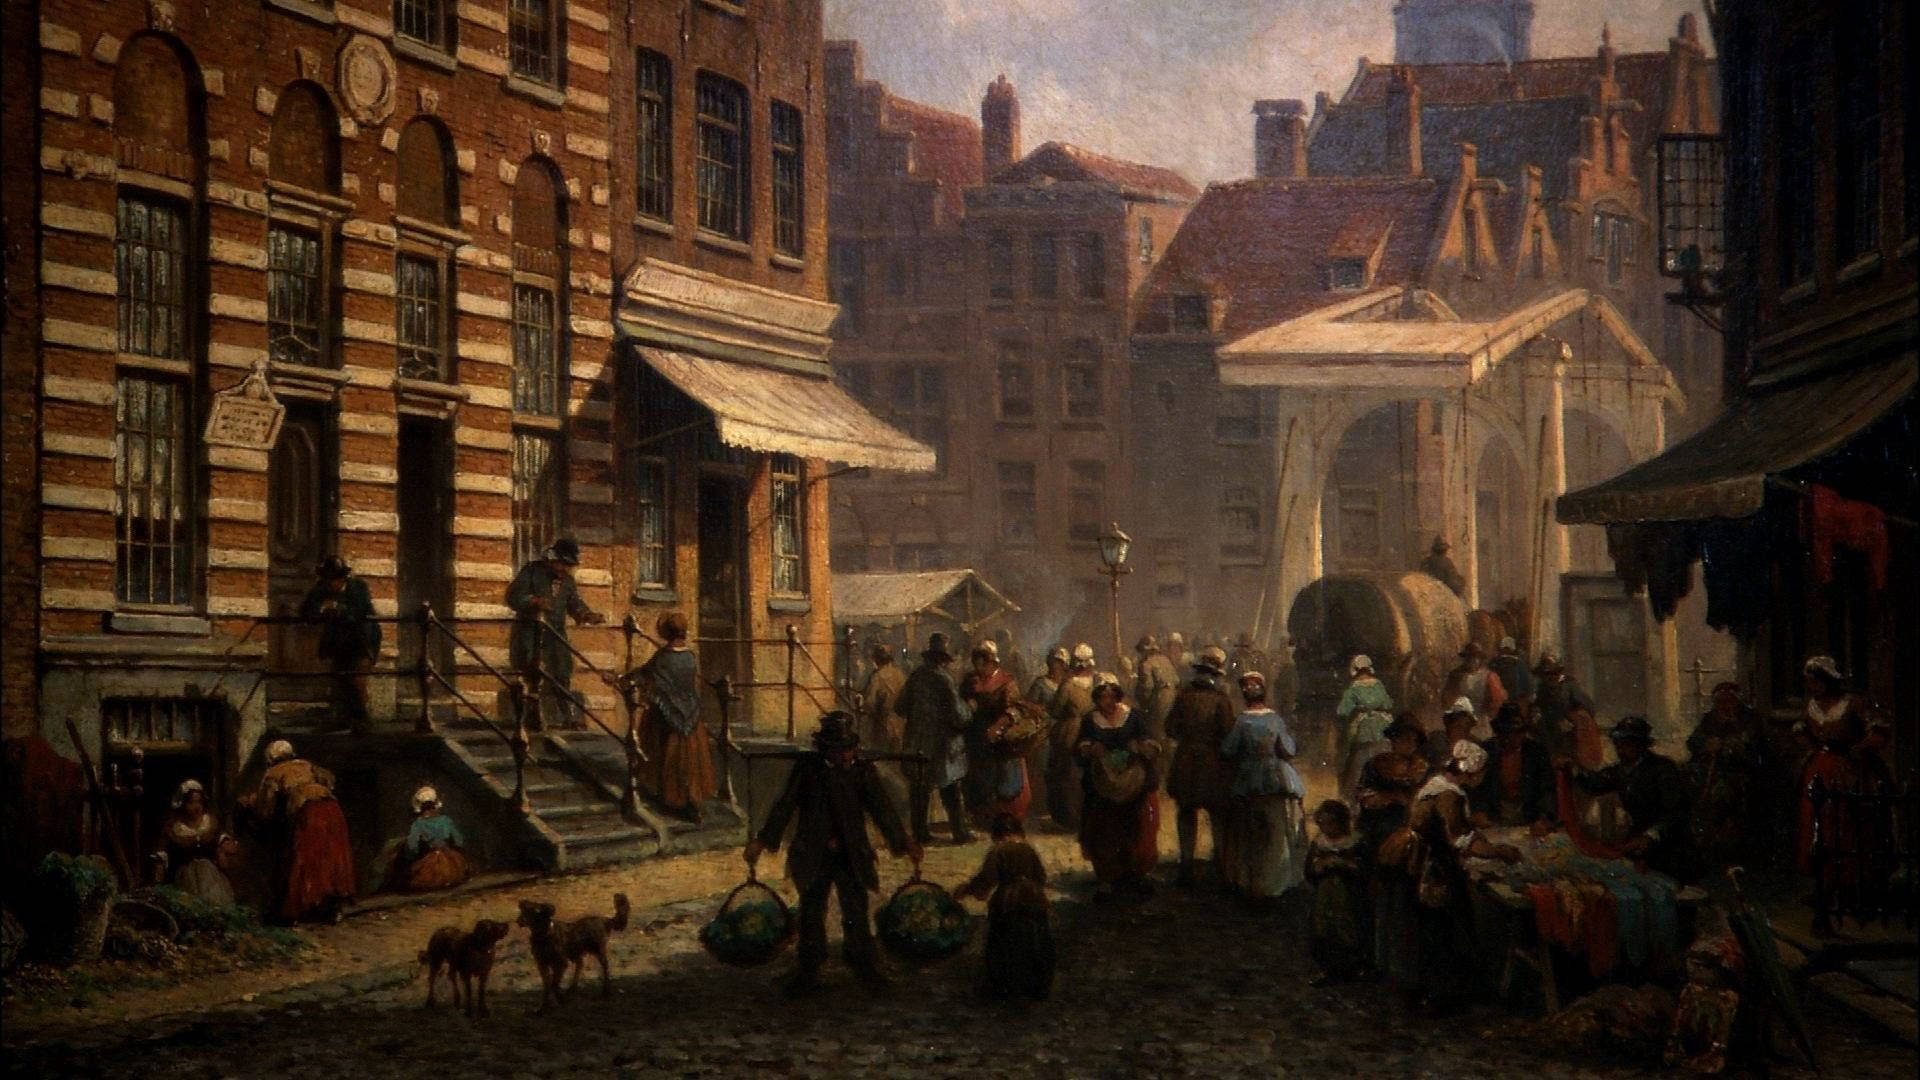 The Rembrandt House Oil Painting Background